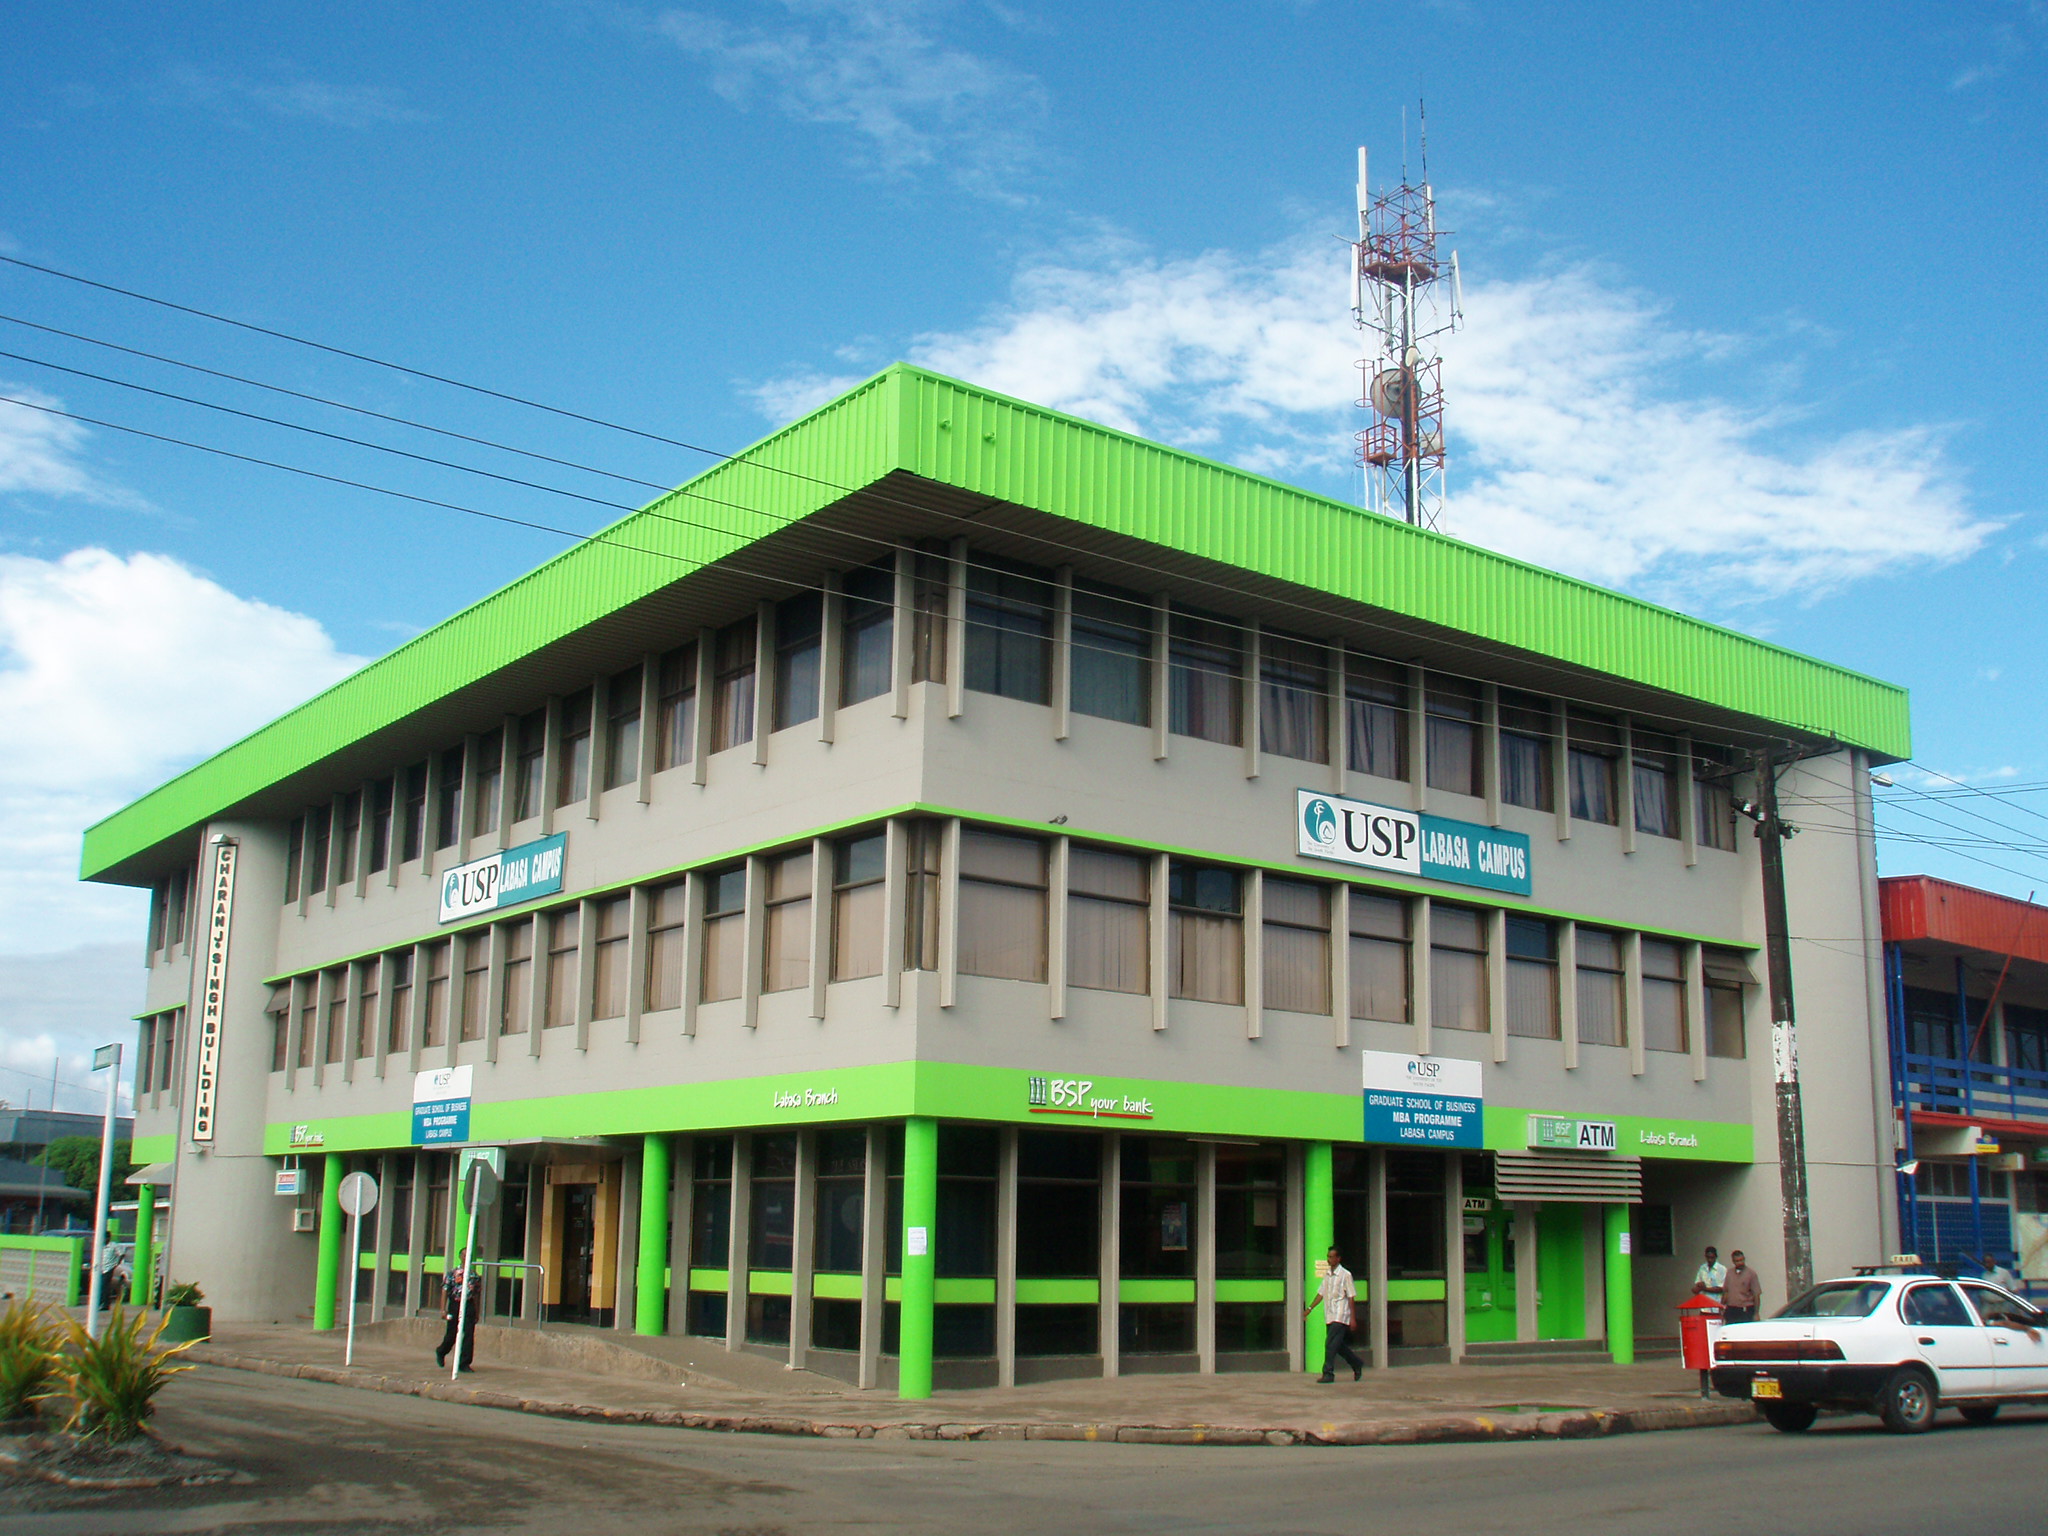 Labasa is the biggest town in the north